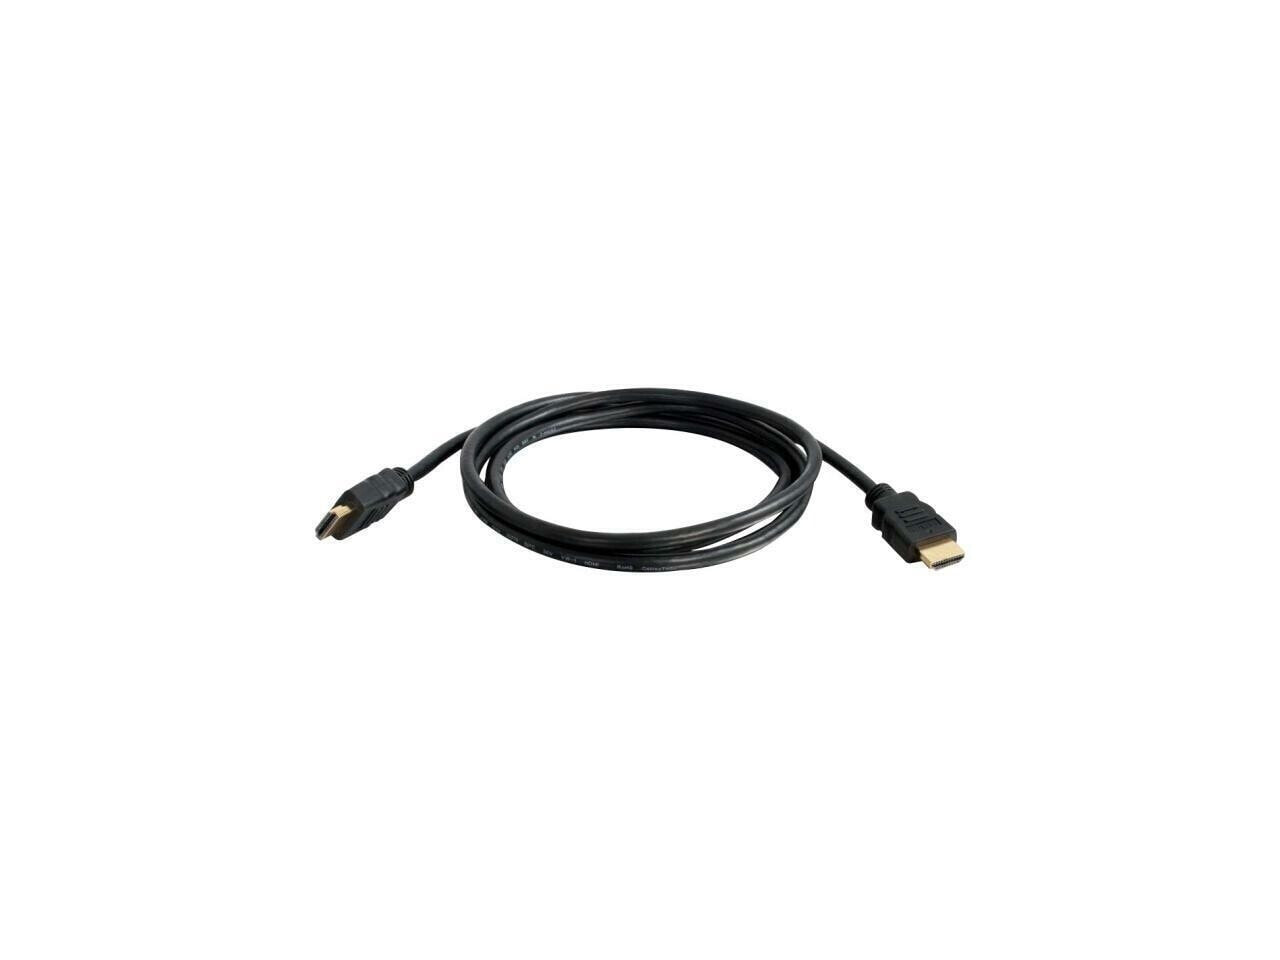 C2G 42502 High Speed HDMI Cable with Ethernet for TVs, Laptops, and Chromebooks,